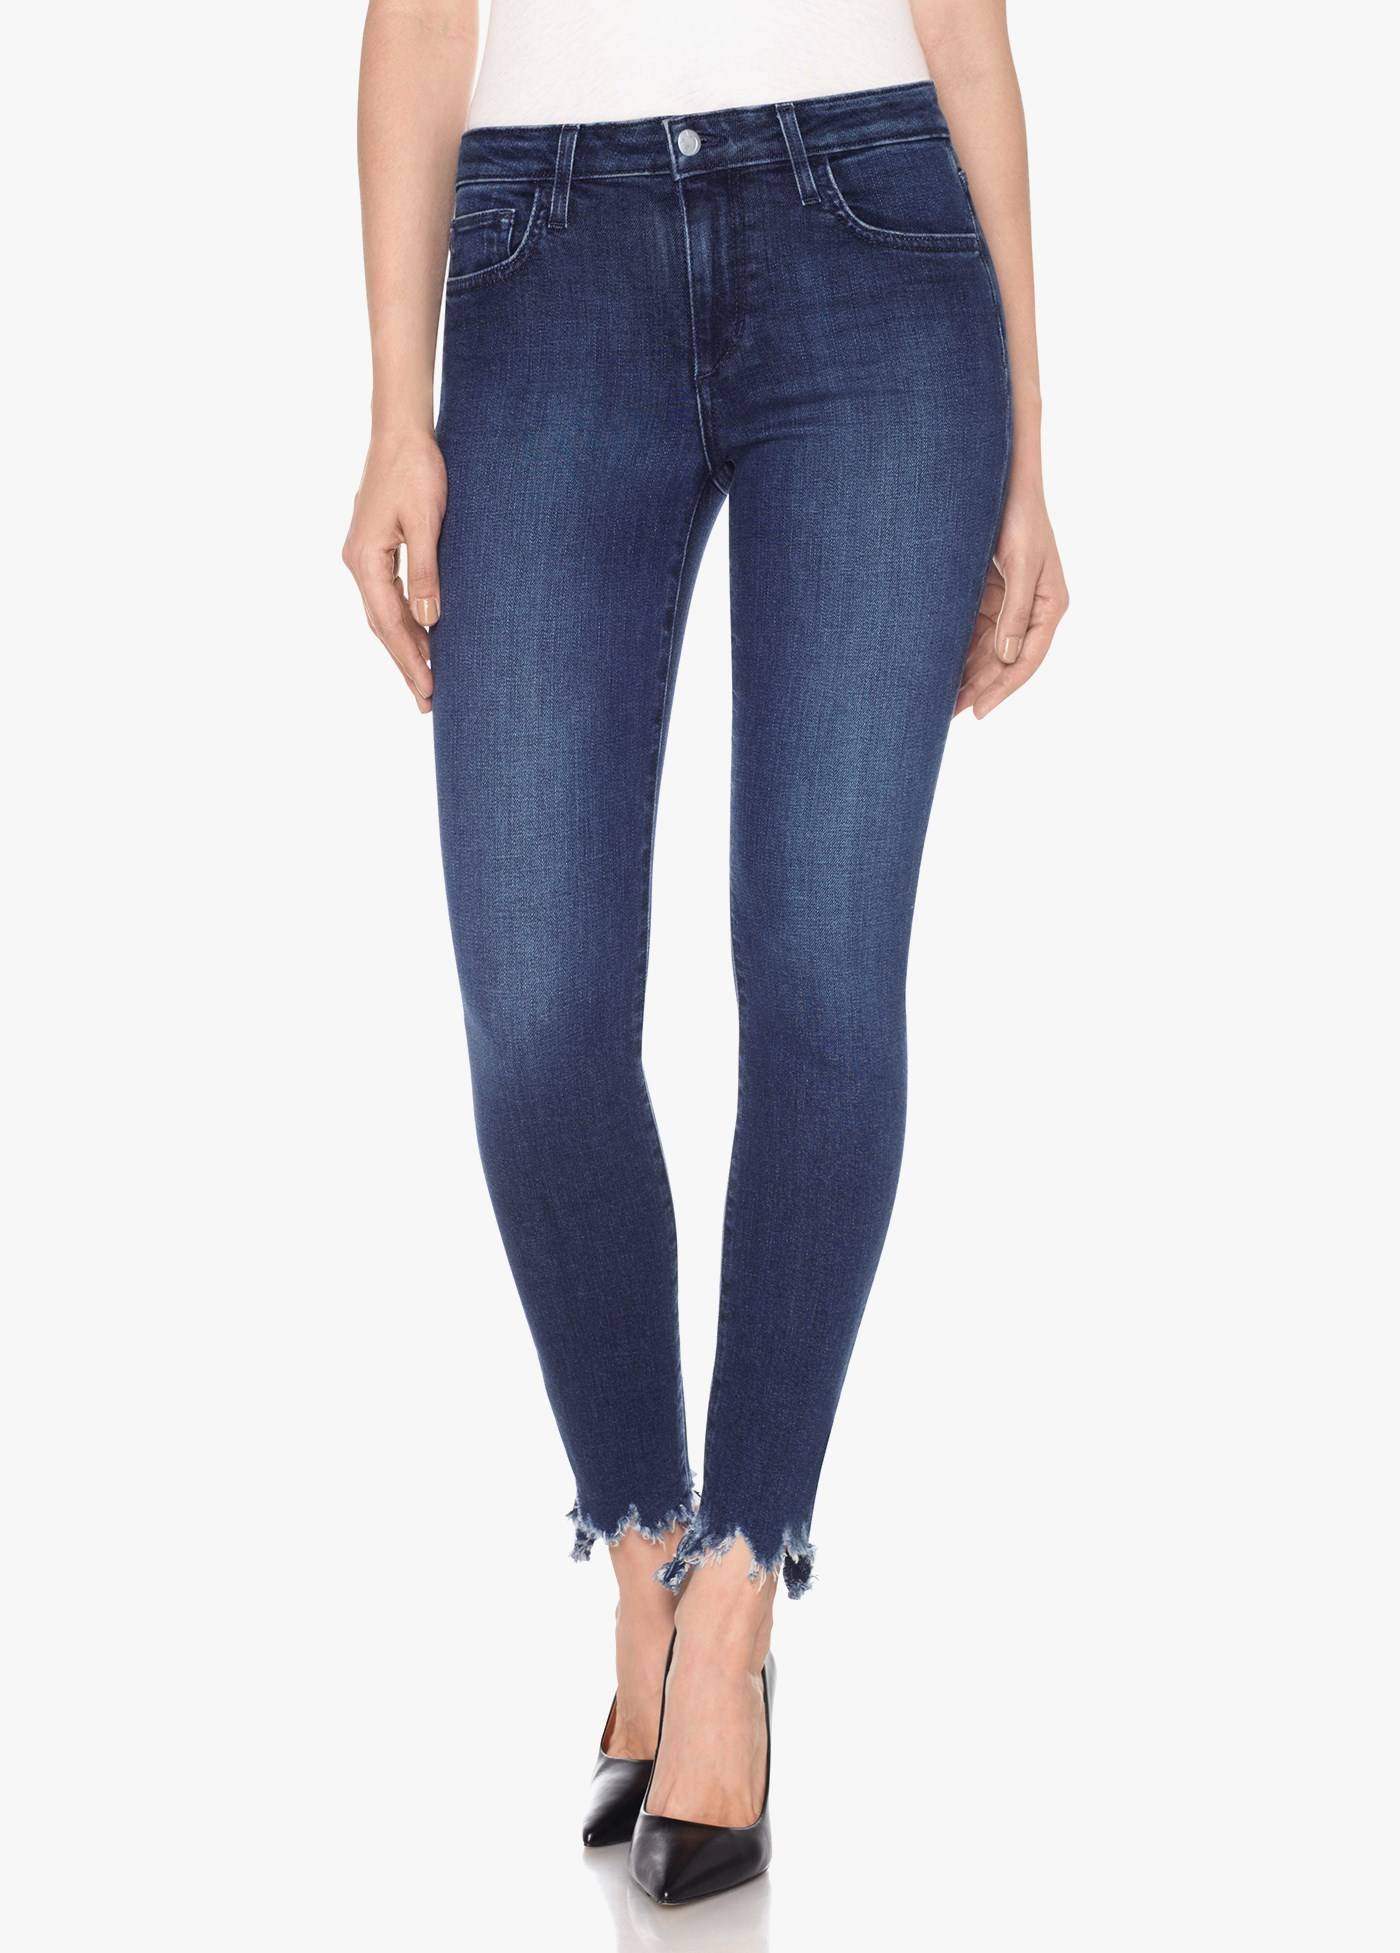 JOE'S JEANS - The Icon Everly Mid-rise Frayed edge ankle Skinny Jean.